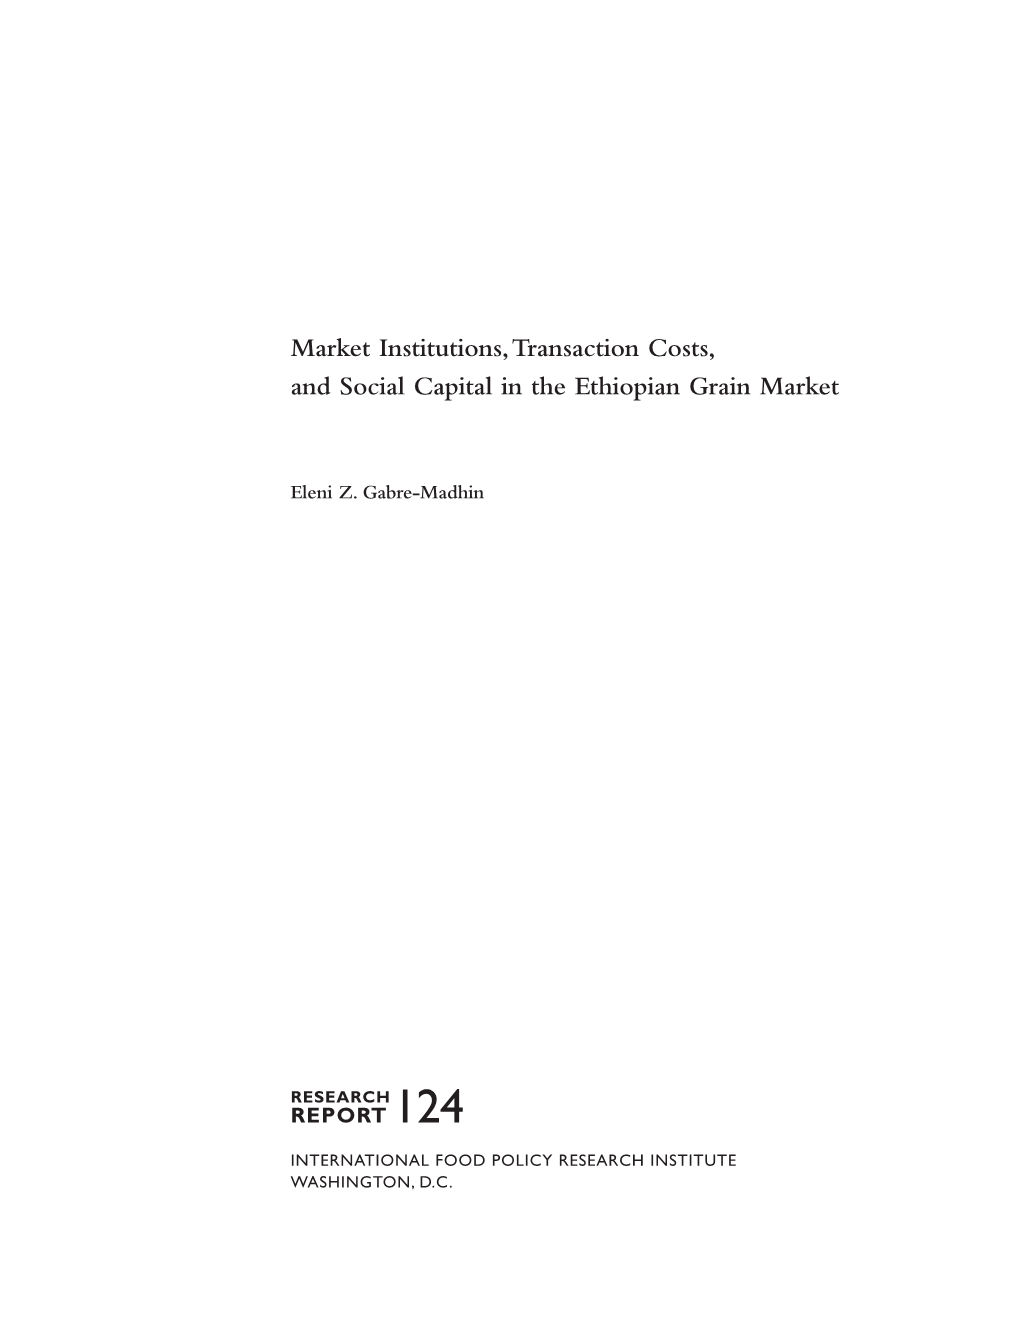 Market Institutions, Transaction Costs, and Social Capital in the Ethiopian Grain Market / Eleni Z